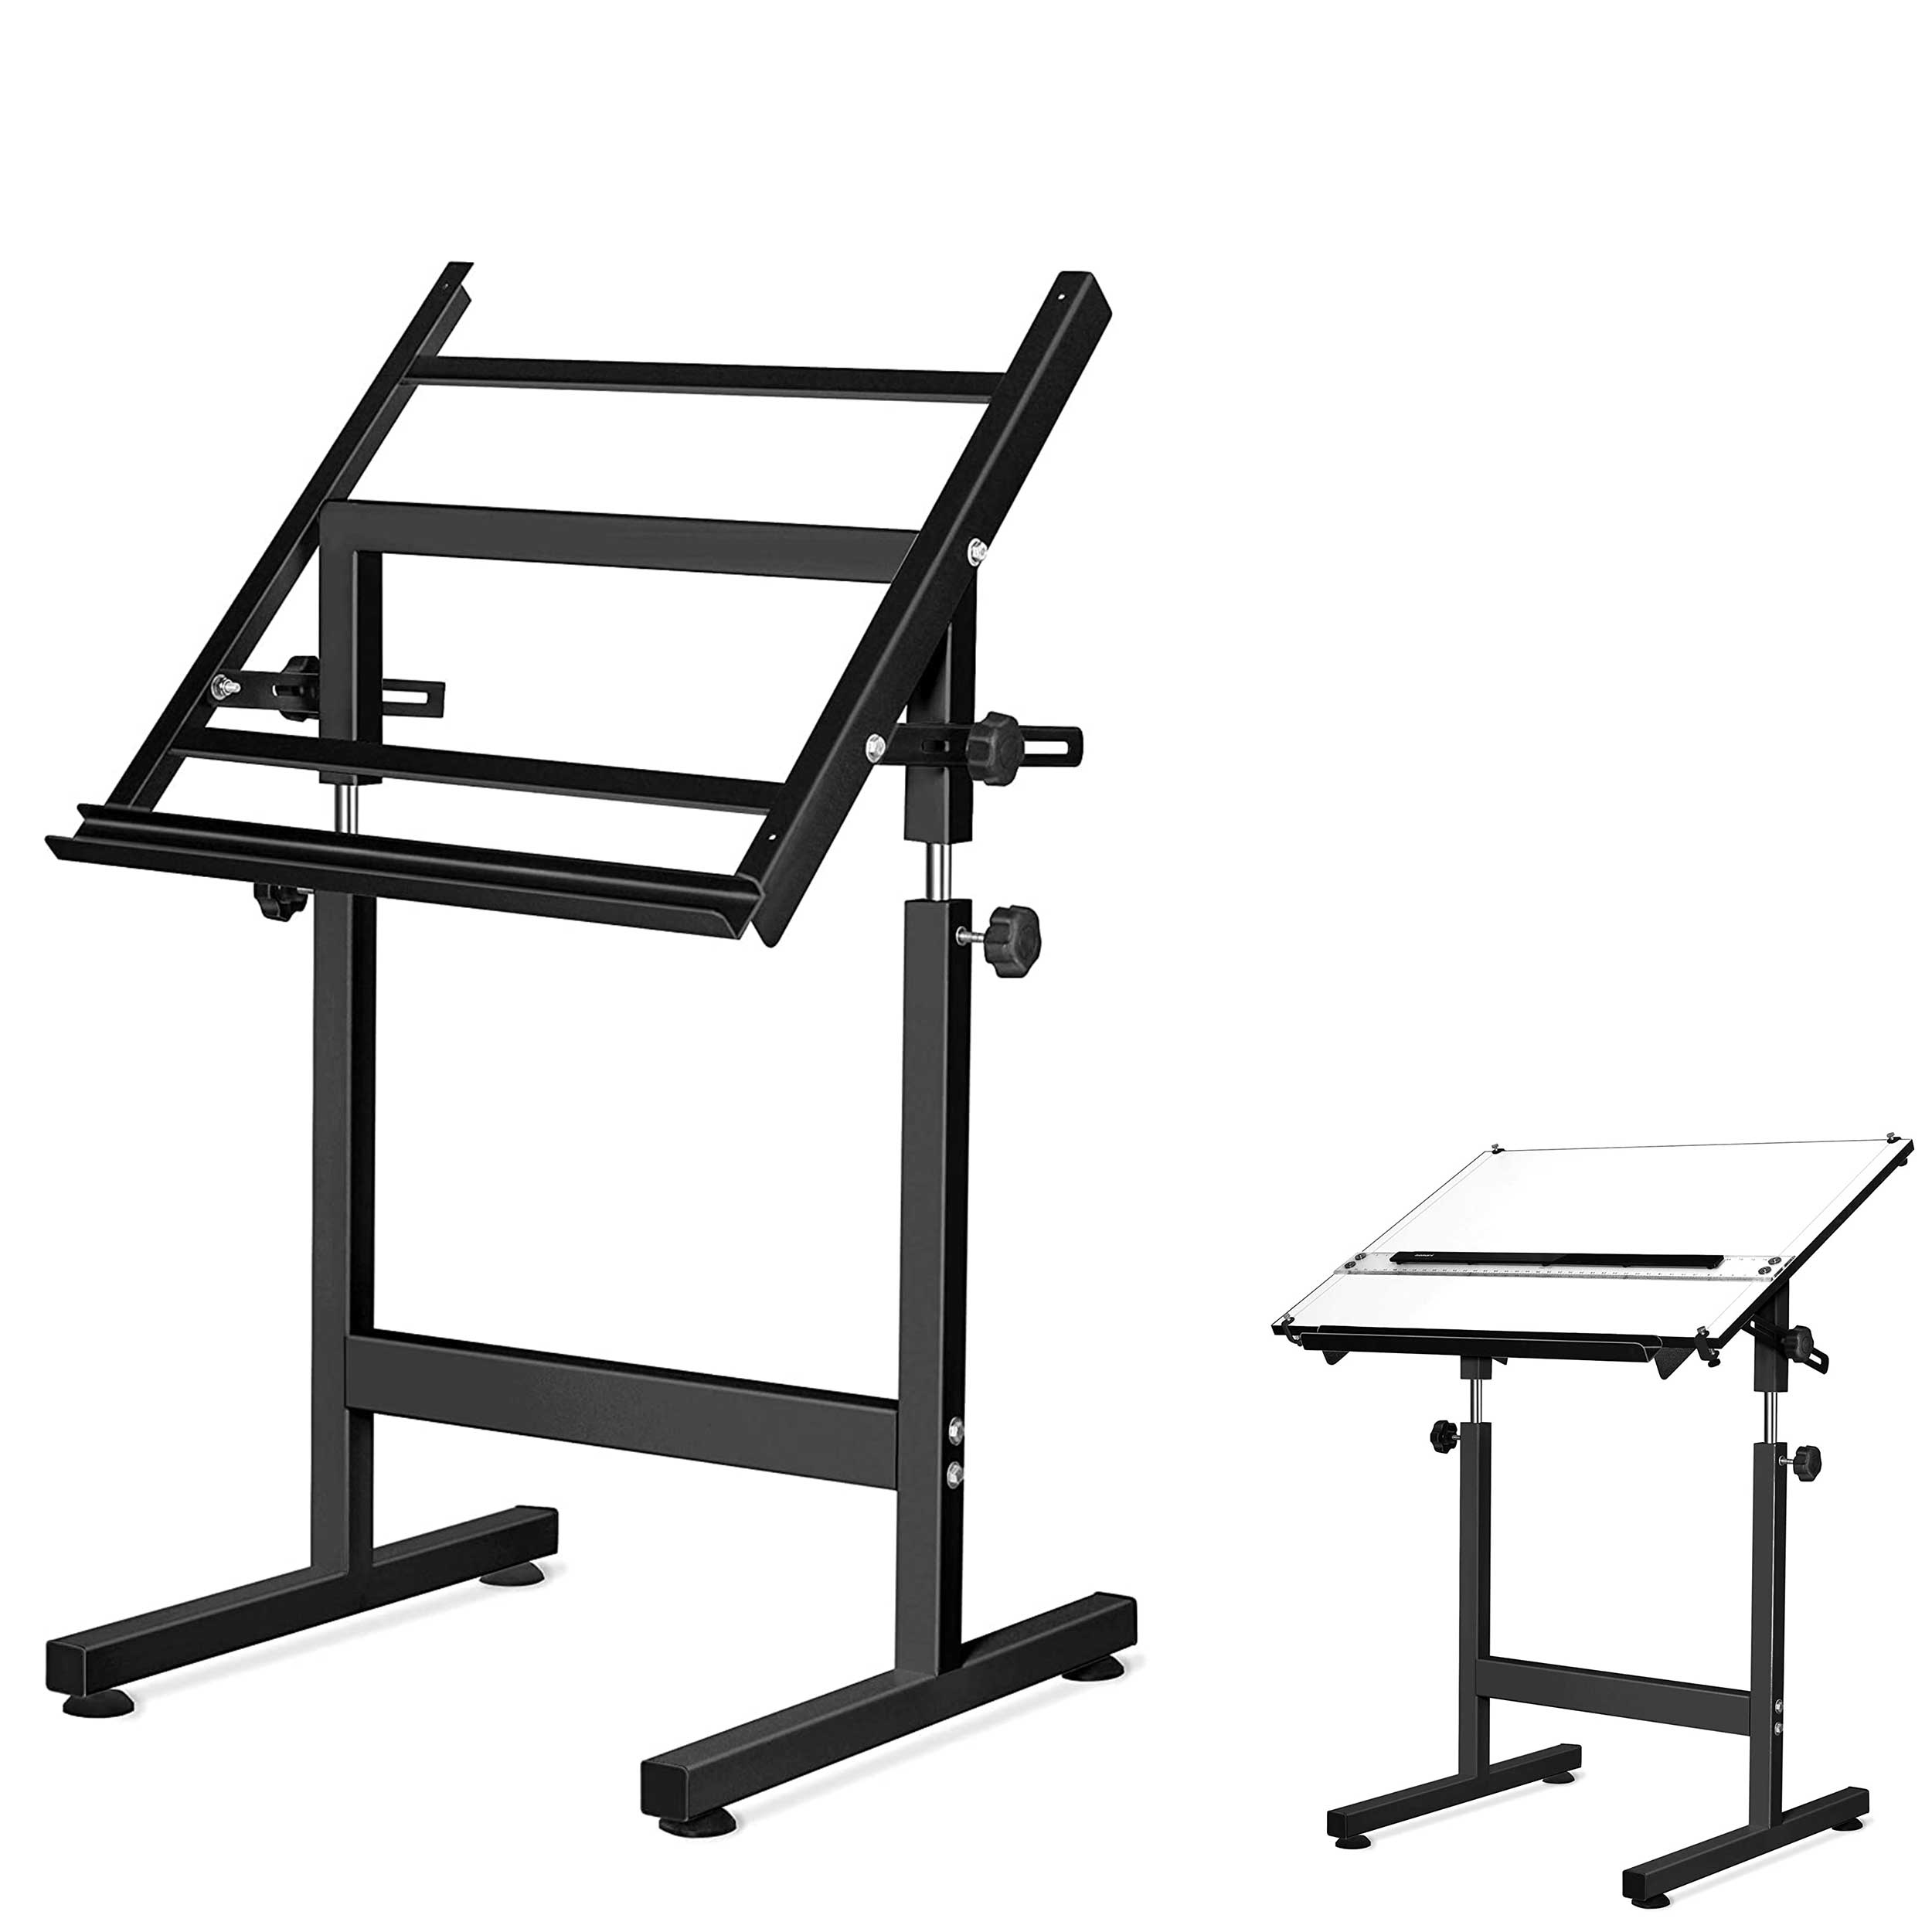 A3 A2 Drawing Board With PARALLEL MOTION & STAND Tilted Architecture WOODEN!